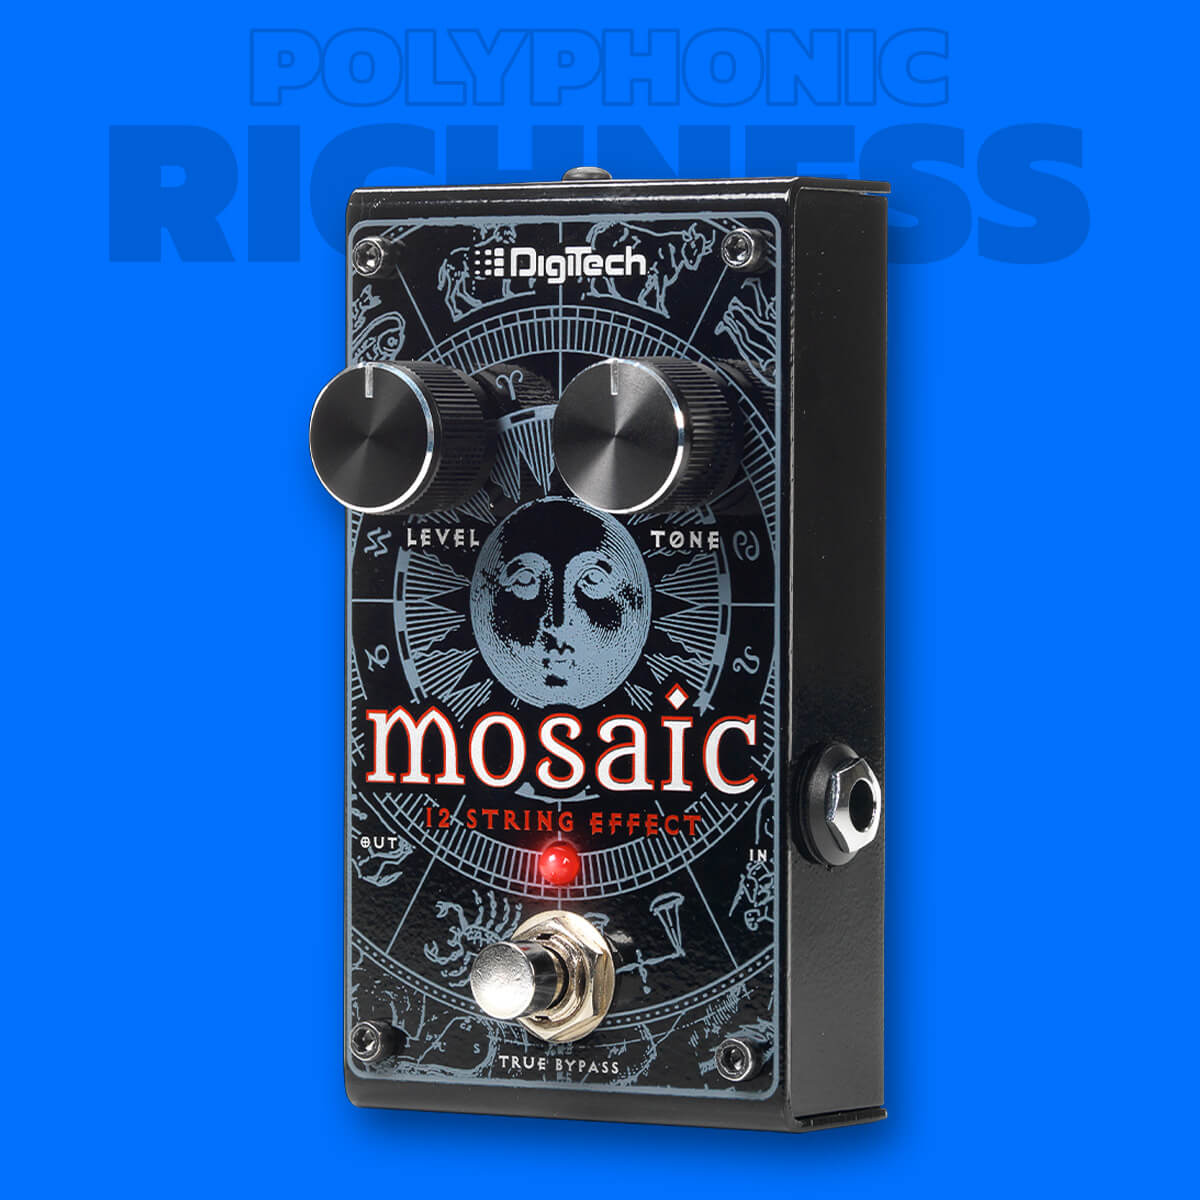 Digitech Mosaic polyphonic 12-string effect guitar pedal in black with gray graphics, blue background that says 